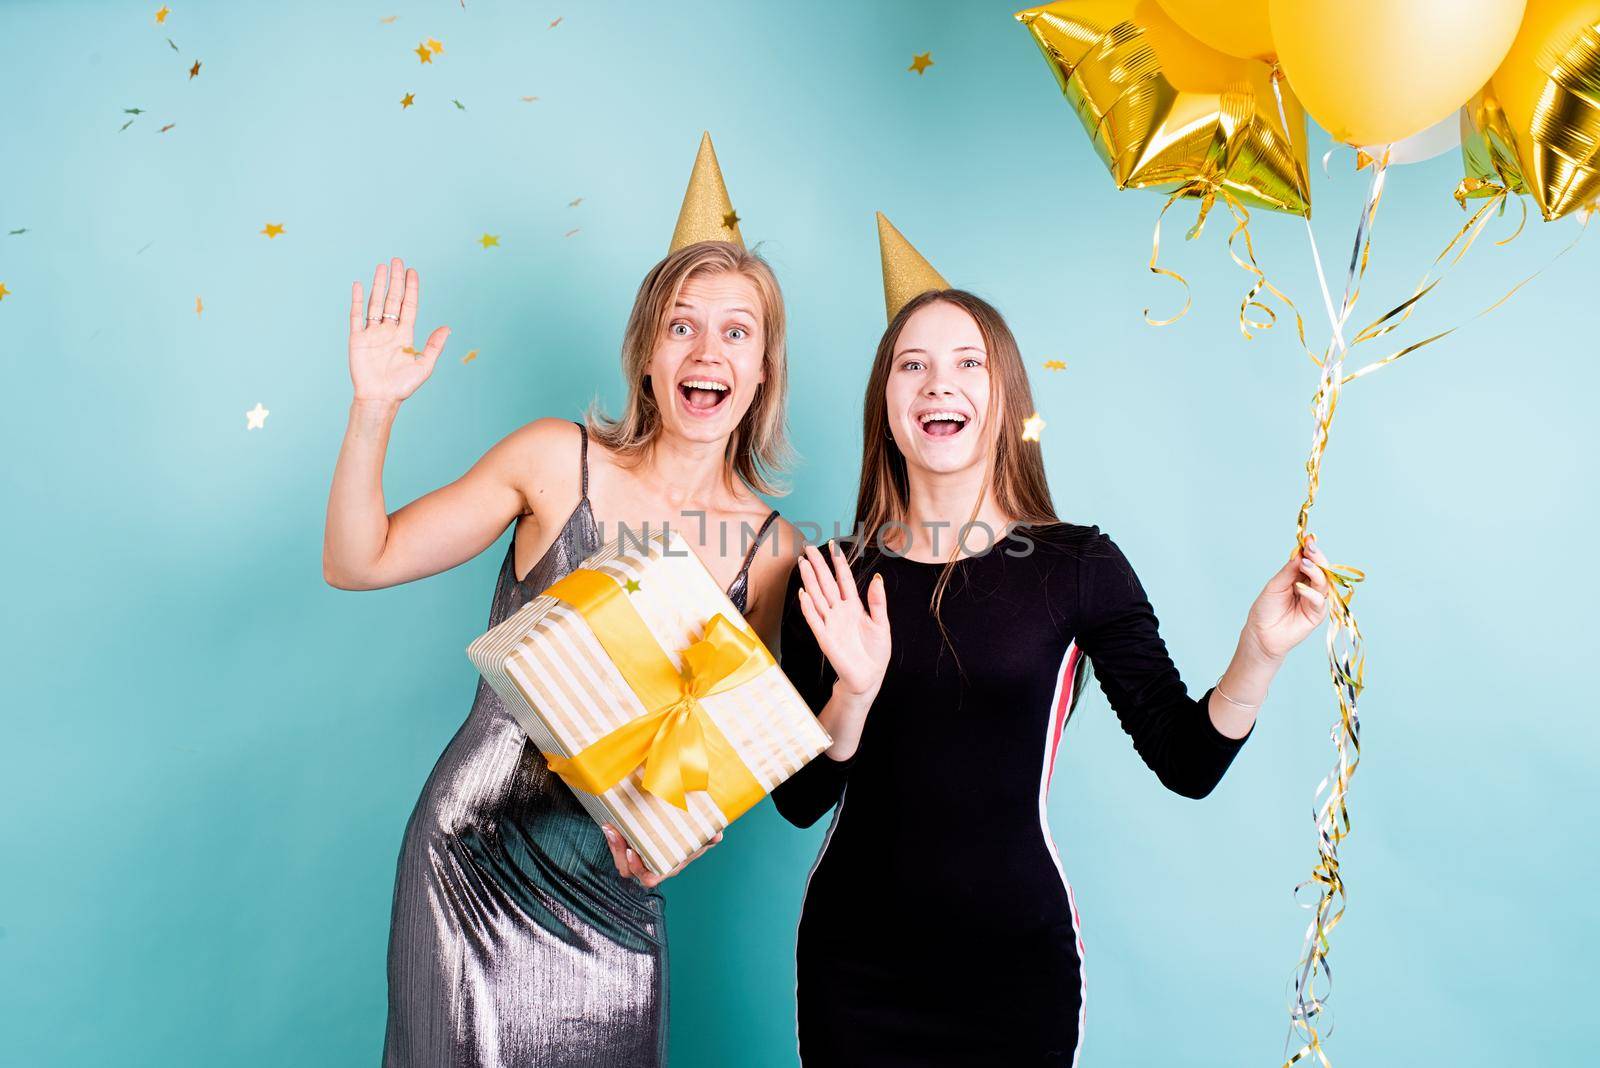 Birthday party. Two young women in birthday hats holding balloons celebrating birthday over blue background